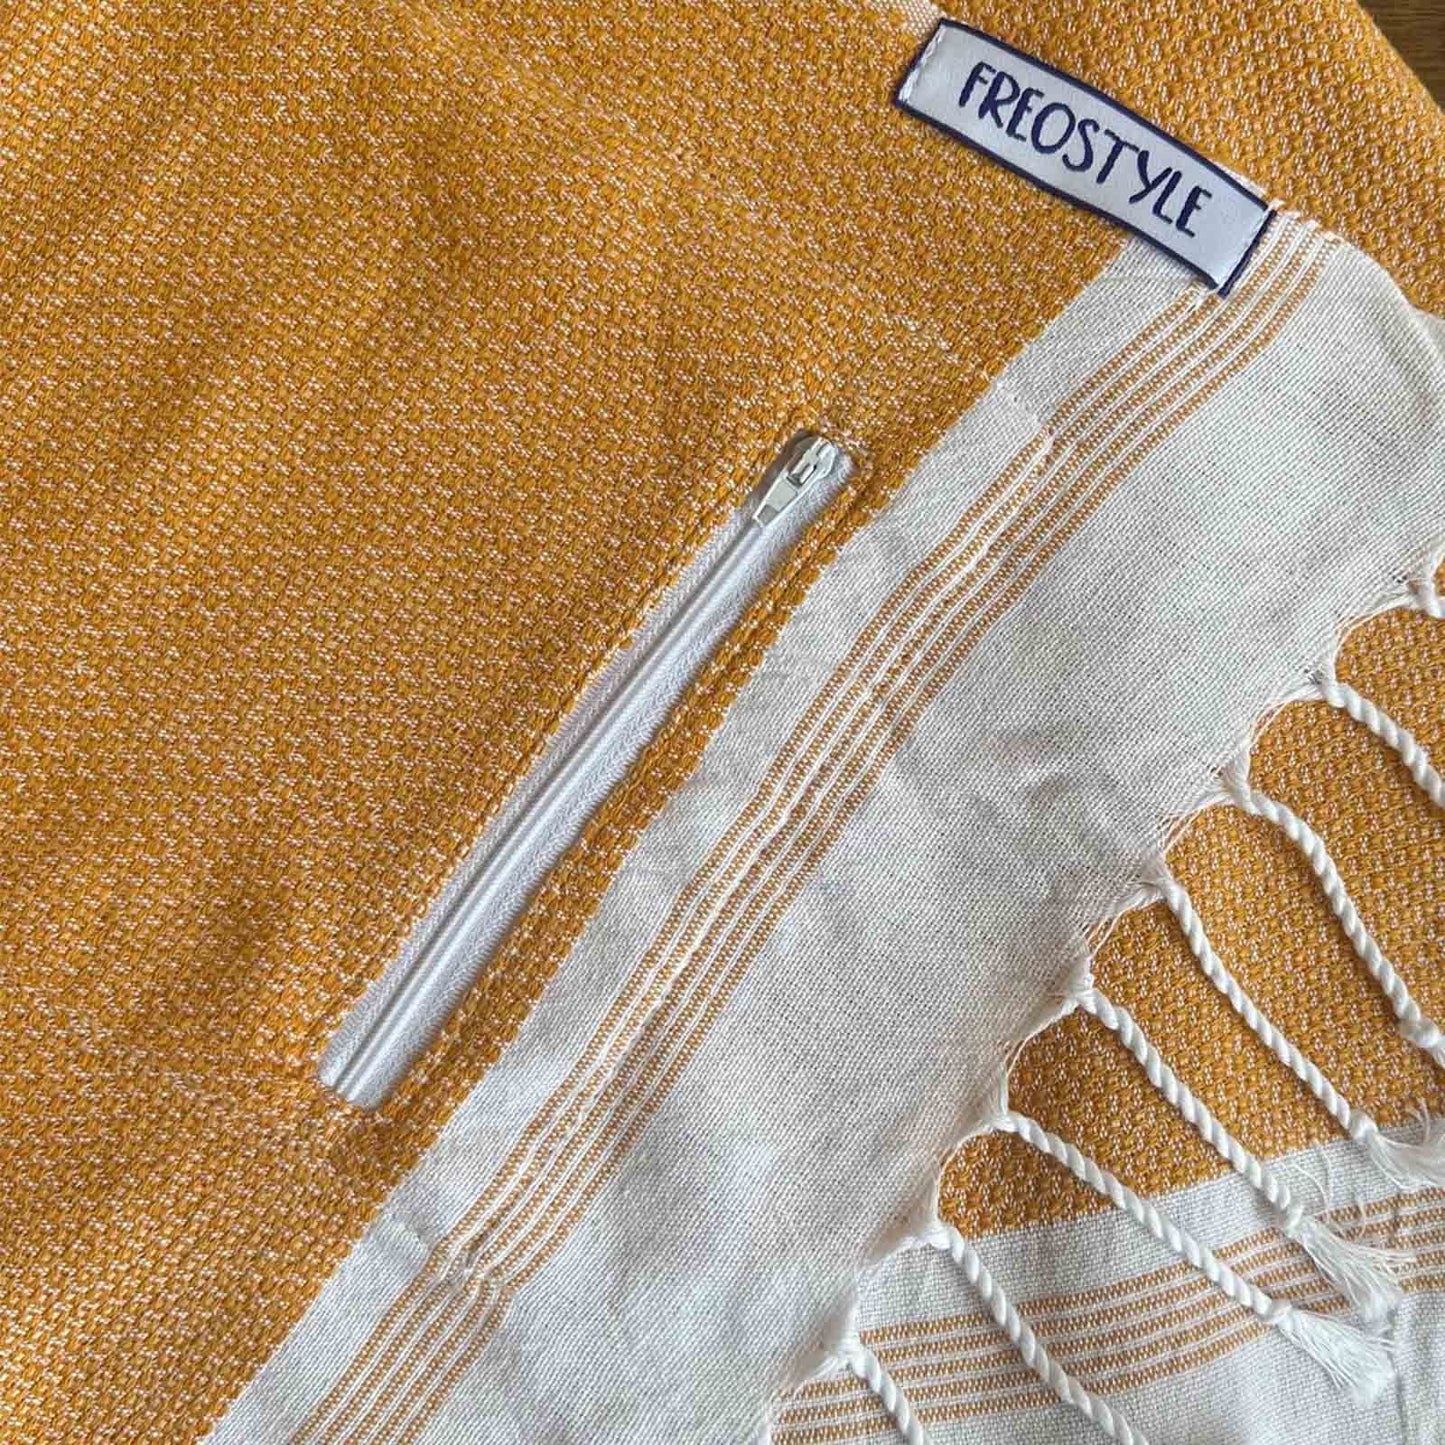 Aure Turkish Towel with Pockets, by Freostyle, close up of pocket